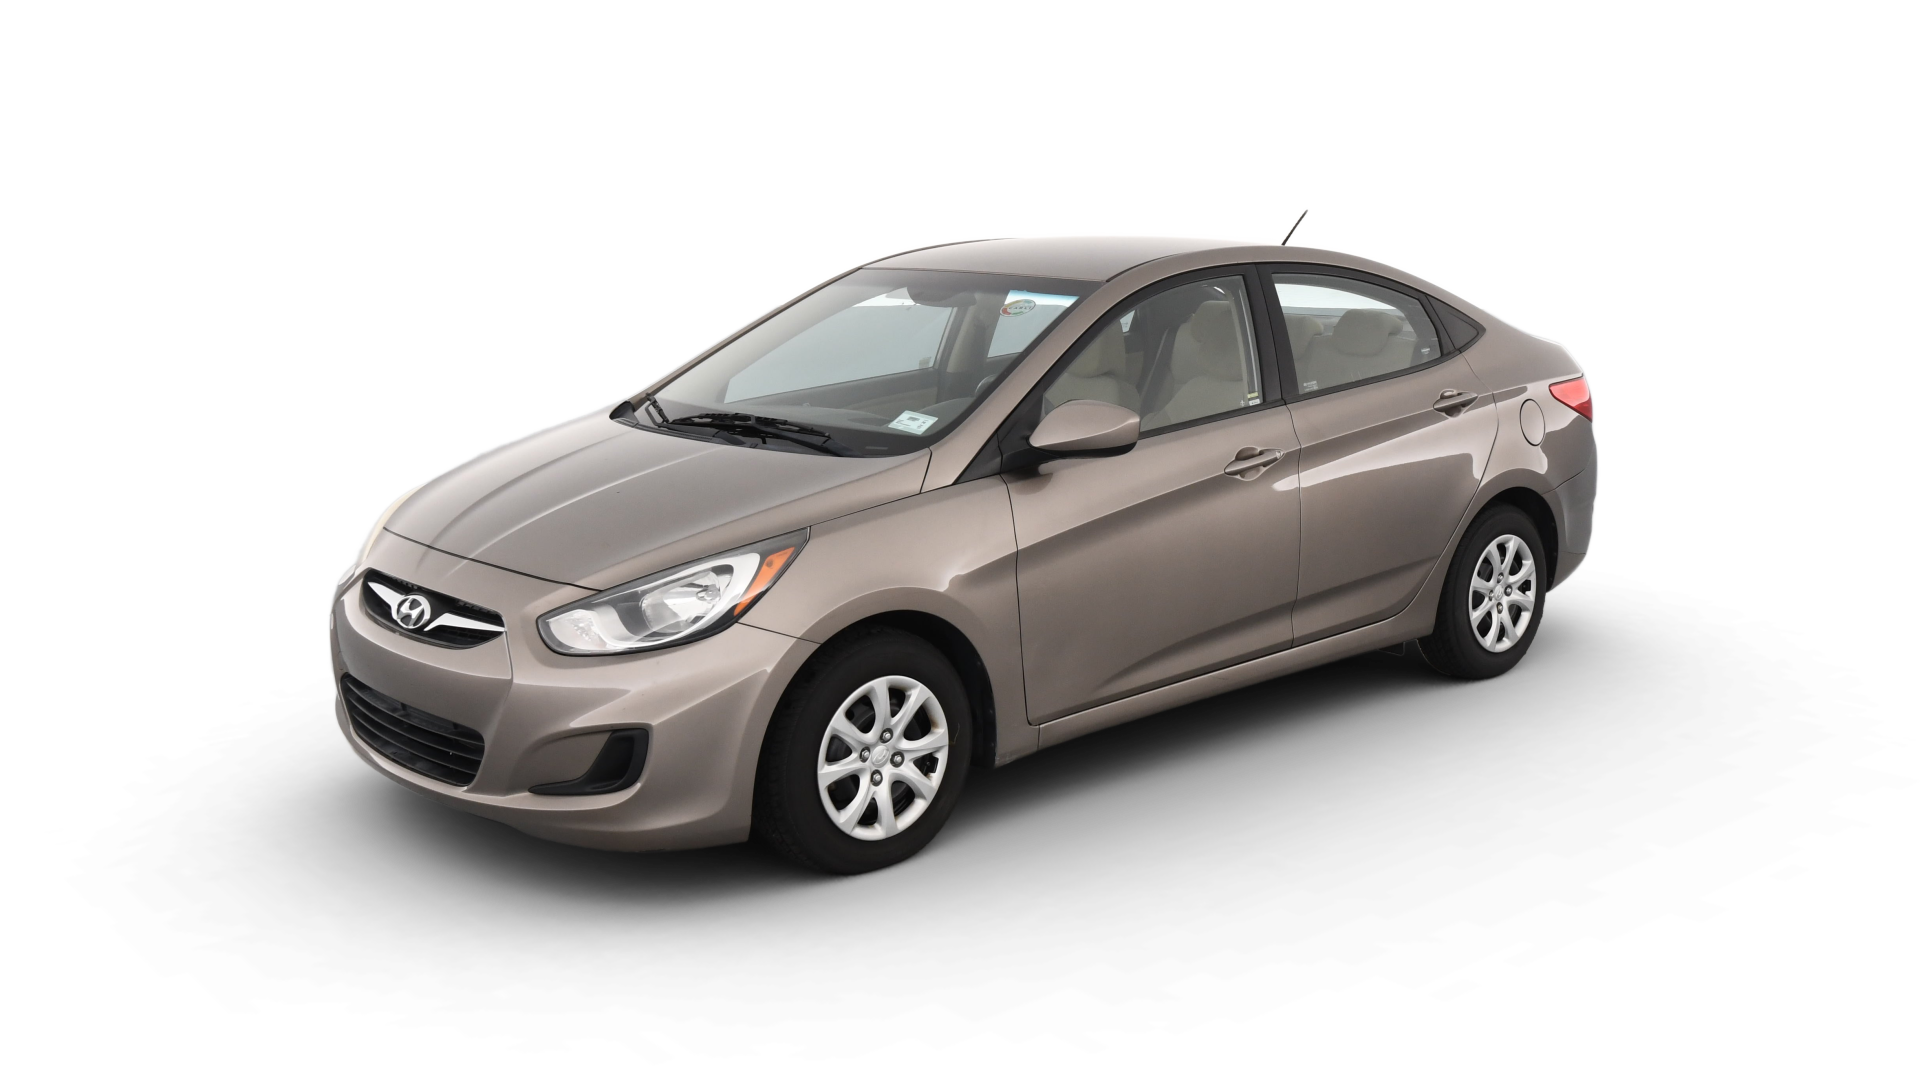 Used 2013 Hyundai Accent for sale in Indianapolis, IN | Carvana